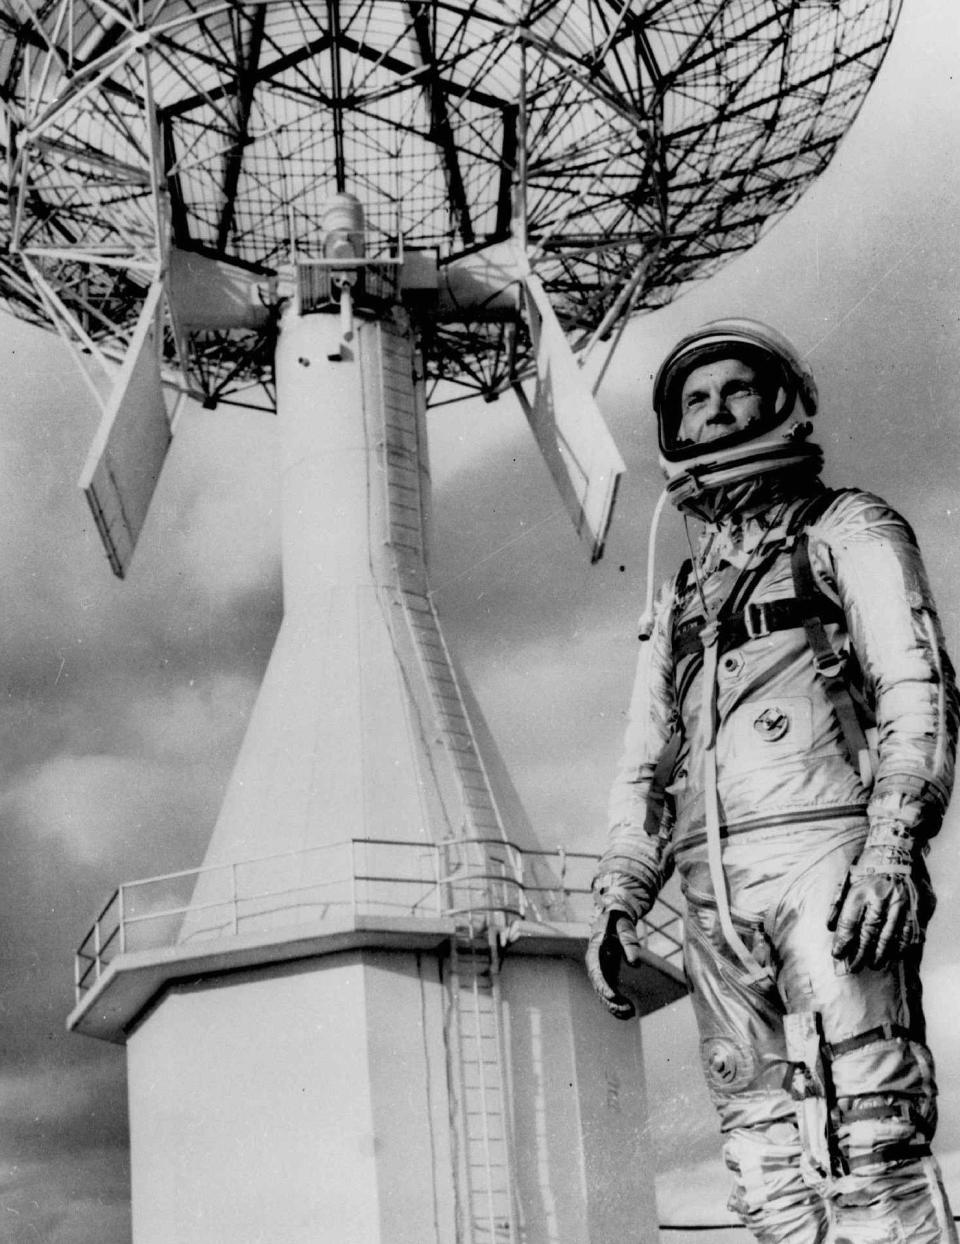 FILE- In this June 18, 1963 file photo astronaut John Glenn, the first American to orbit the earth, posing before a Project Mercury tracking station at Cape Canaveral, Fla. A panel is scheduled to vote Thursday, Feb. 25, 2021, on bringing a statue of the late astronaut and U.S. senator to the Ohio Statehouse to mark major future milestones, such as his birthday and the anniversary of his famous space flight. Glenn died in 2016 at age 95. (AP Photo, File)